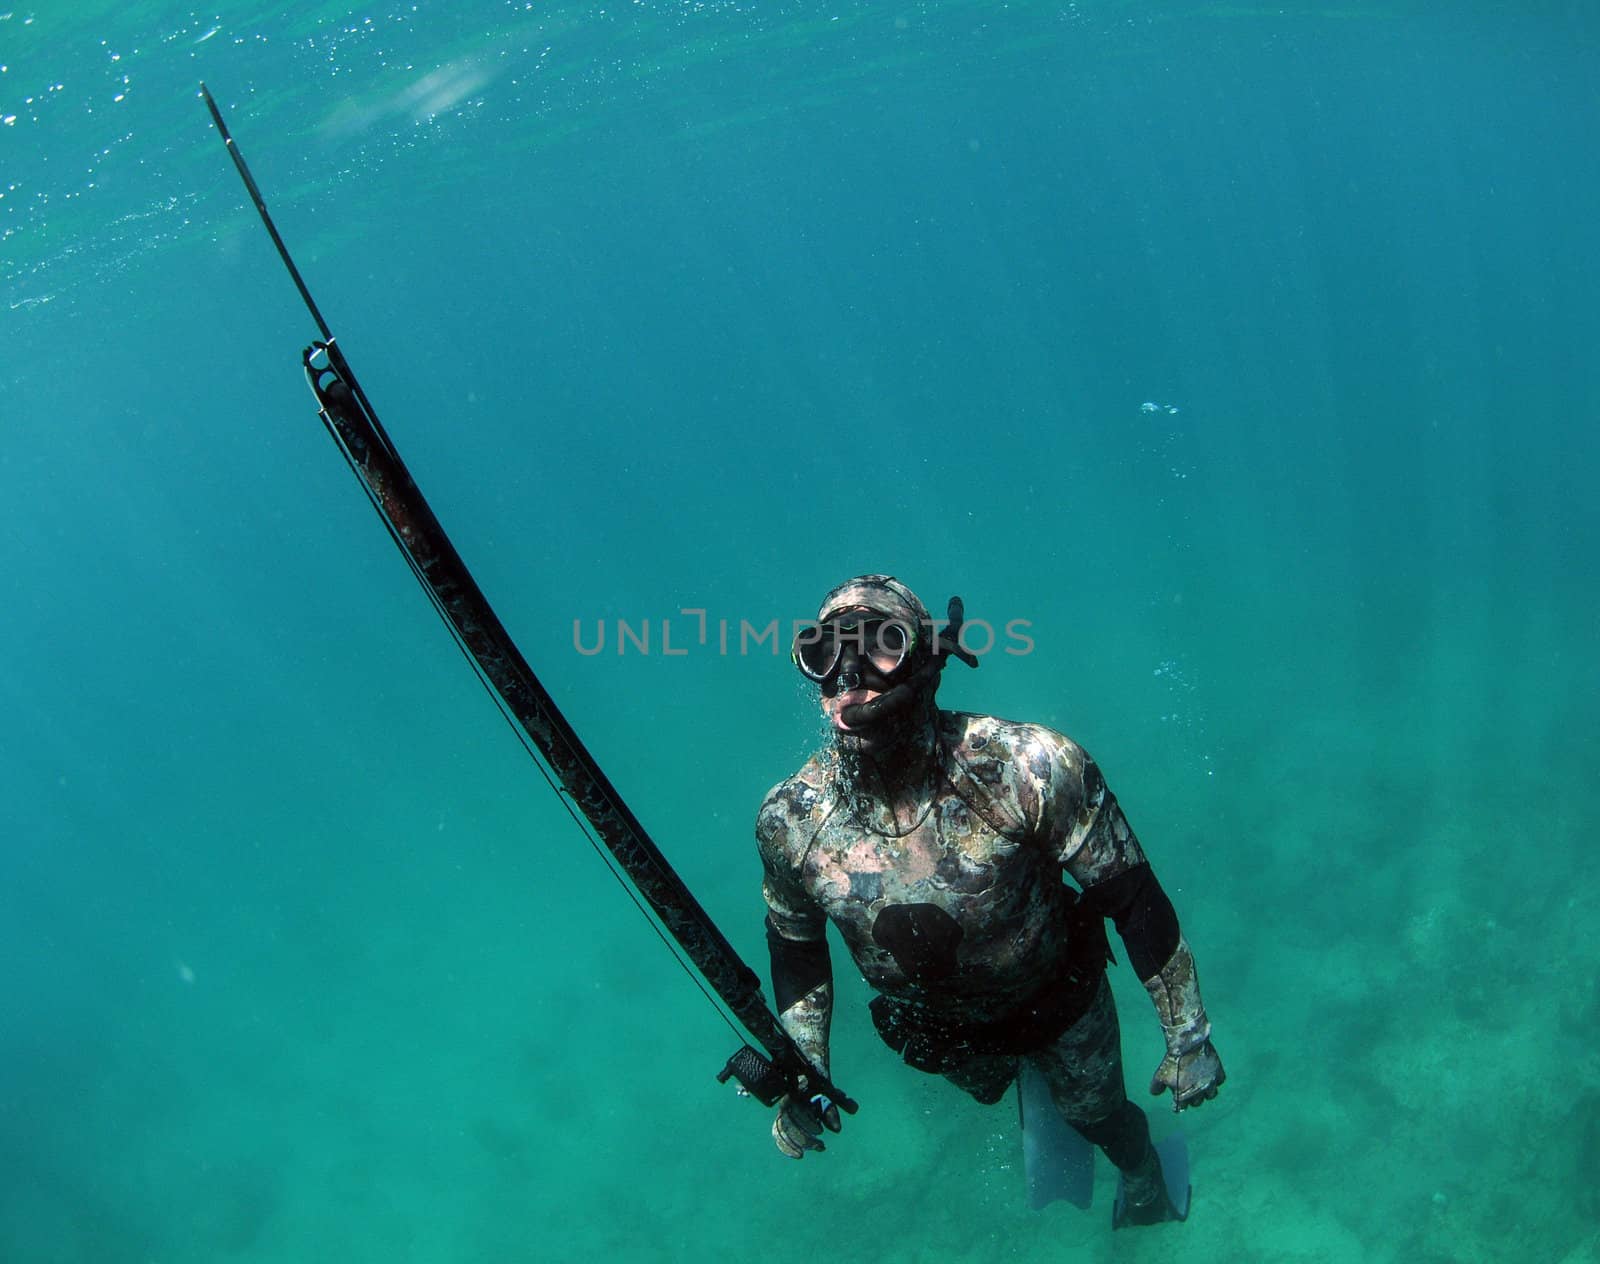 Man spearfishing and free diving in camouflage wetsuit in Atlantic Ocean